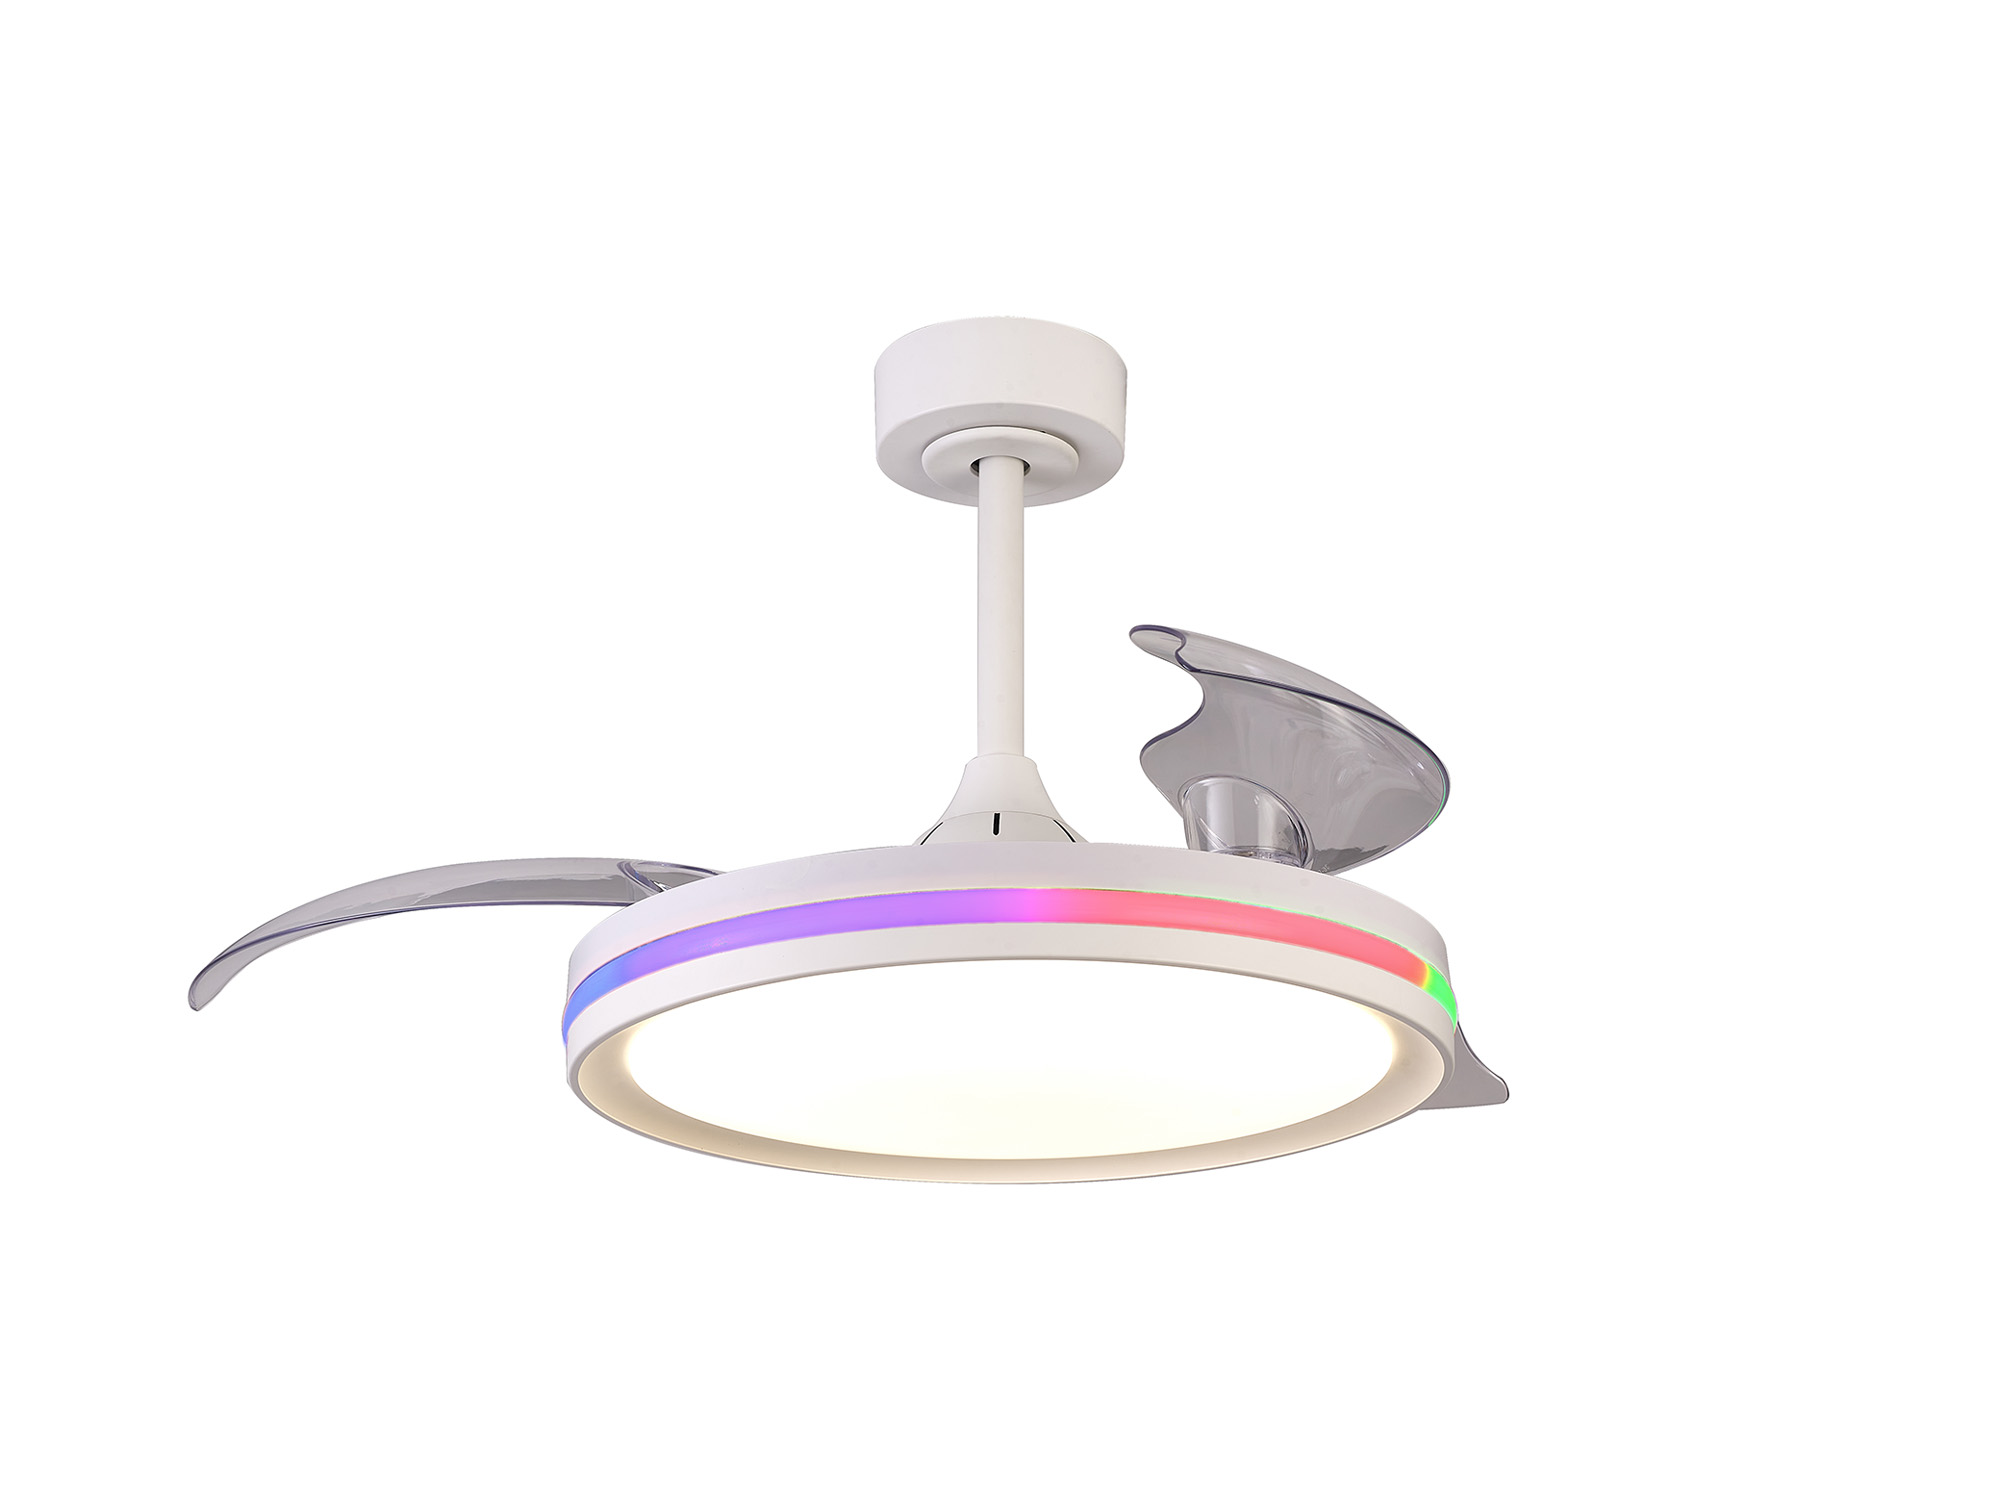 M8727  Rafaga 50W LED Dimmable White/RGB Ceiling Light With Built-In 30W DC Reversible Fan; Remote Control 3000-6500K; White